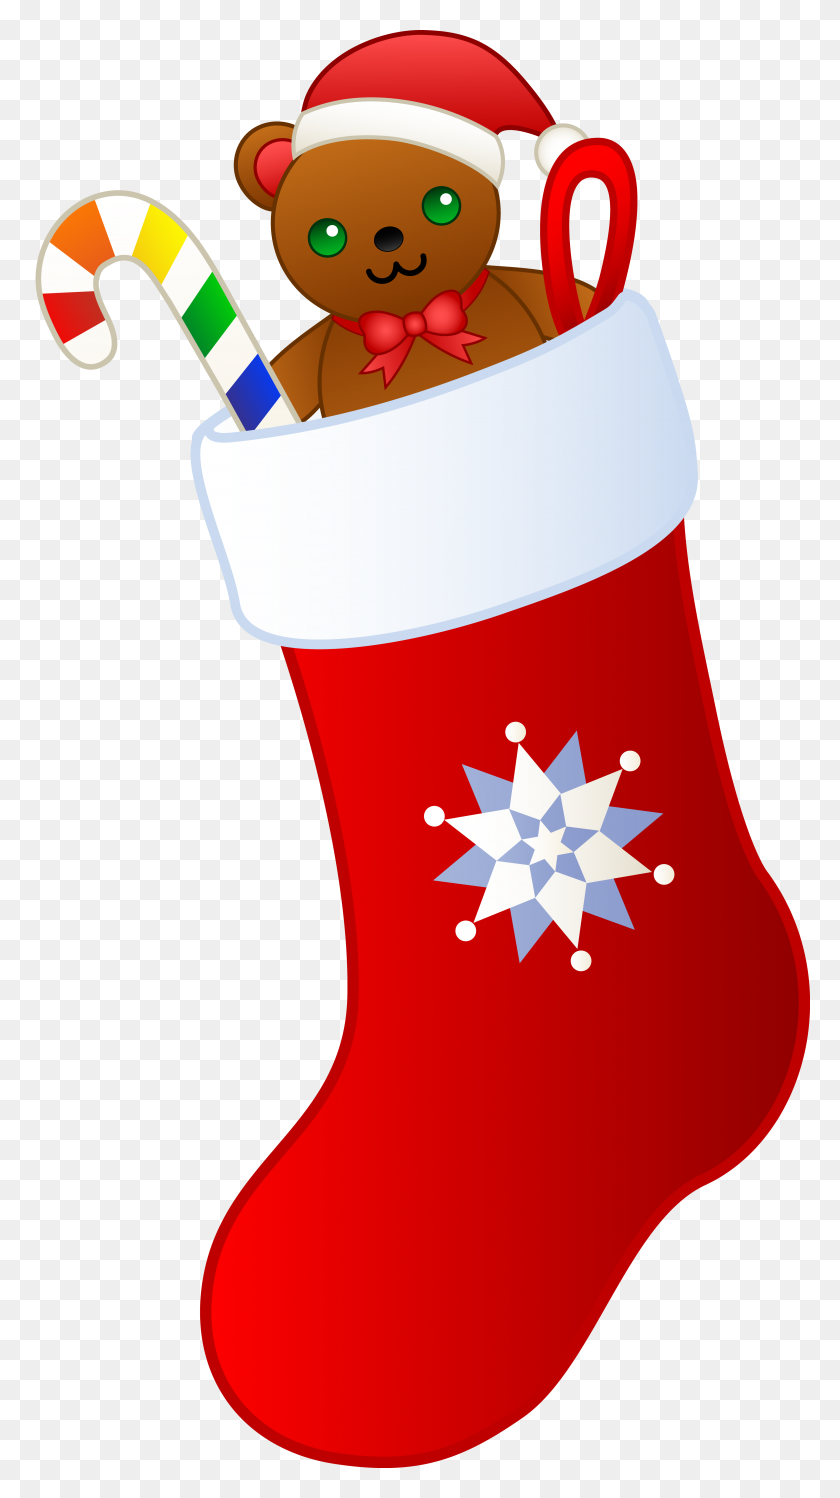 4020x7412 Free Christmas Stocking Clipart Fun For Christmas Halloween - Christmas Present Clipart Free